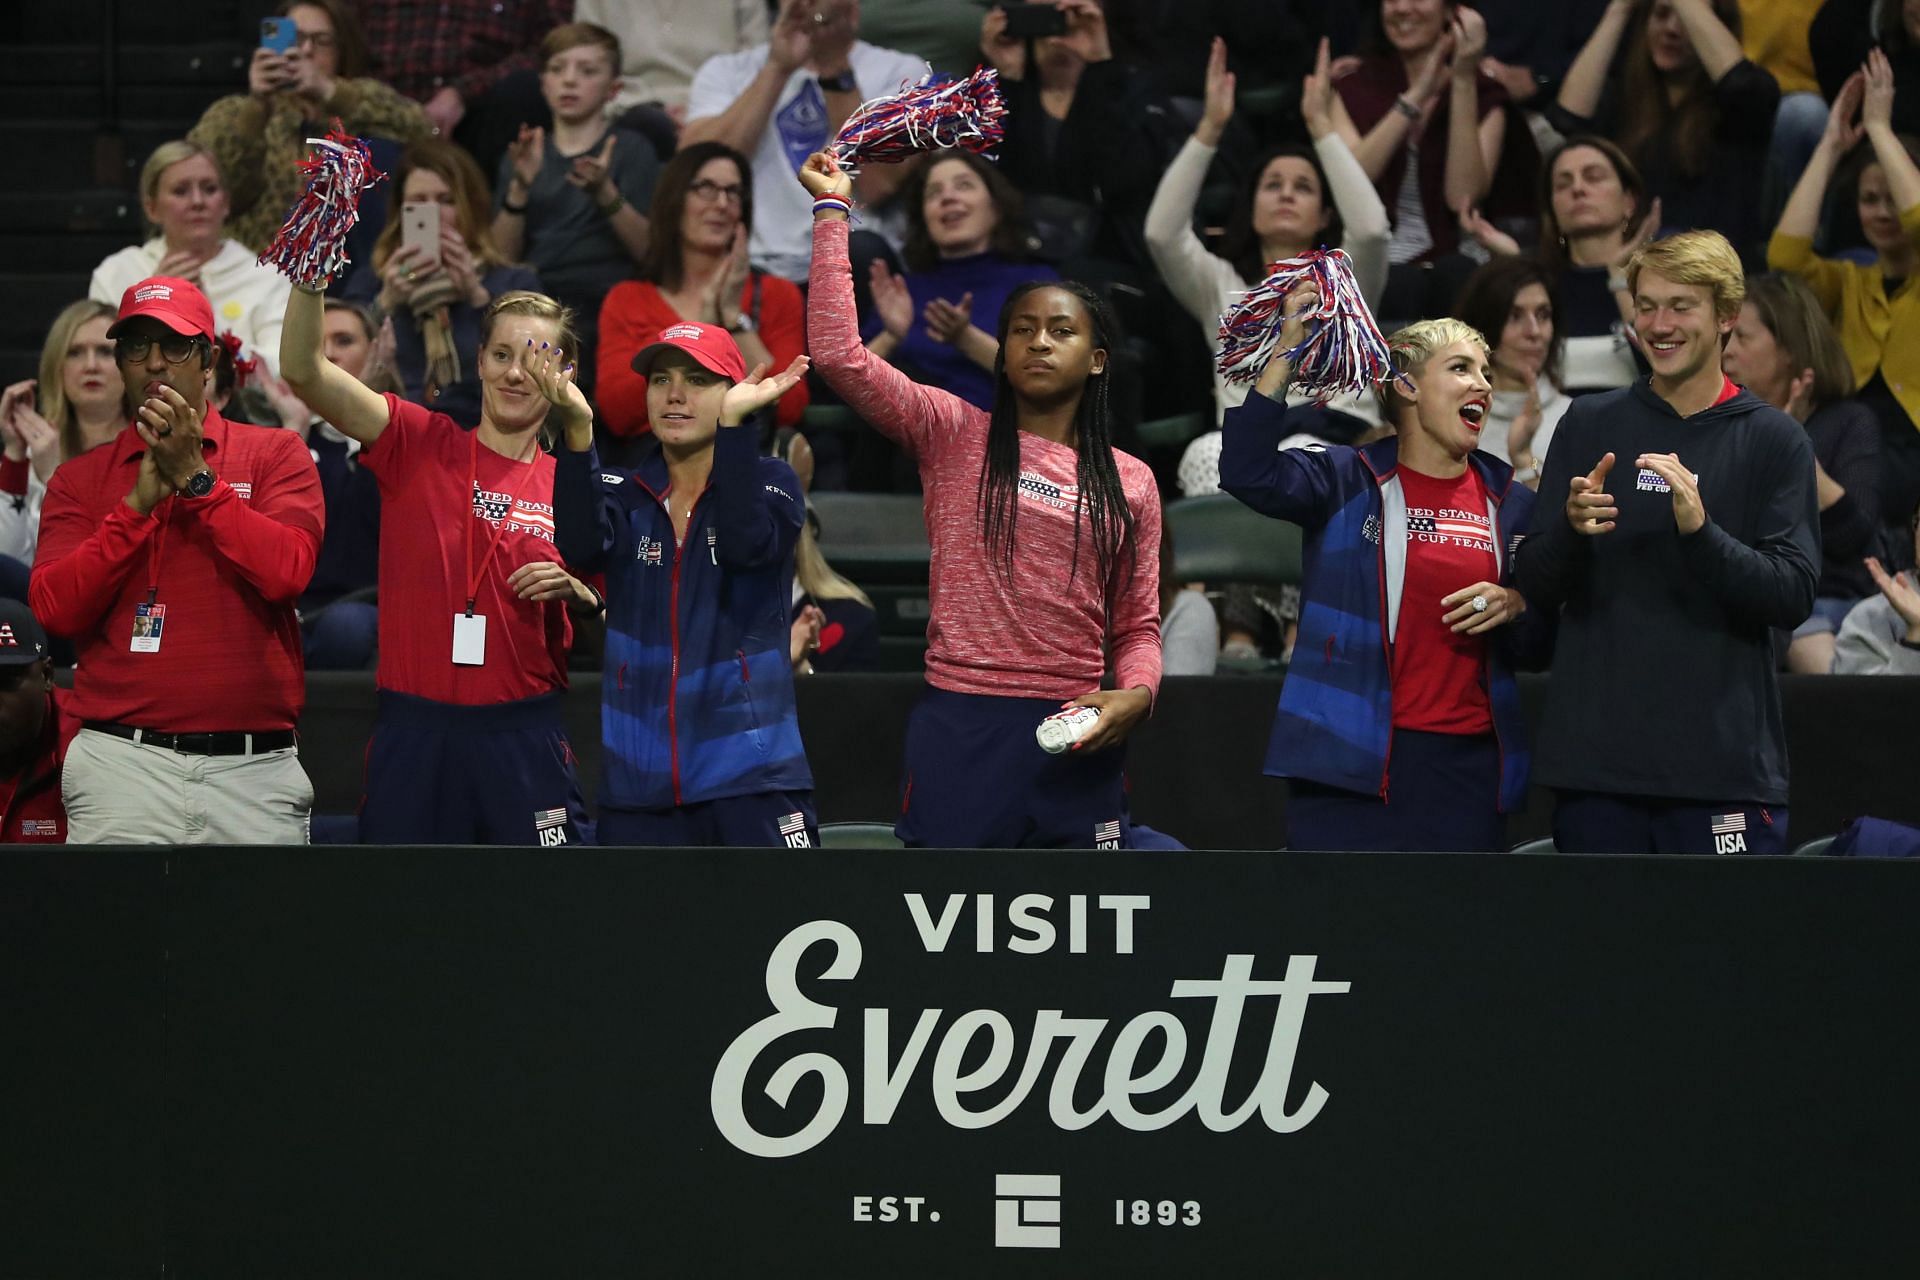 Coco Gauff (fourth from left) cheers on her idol Serena Williams (not in photo) during the 2020 Fed Cup.